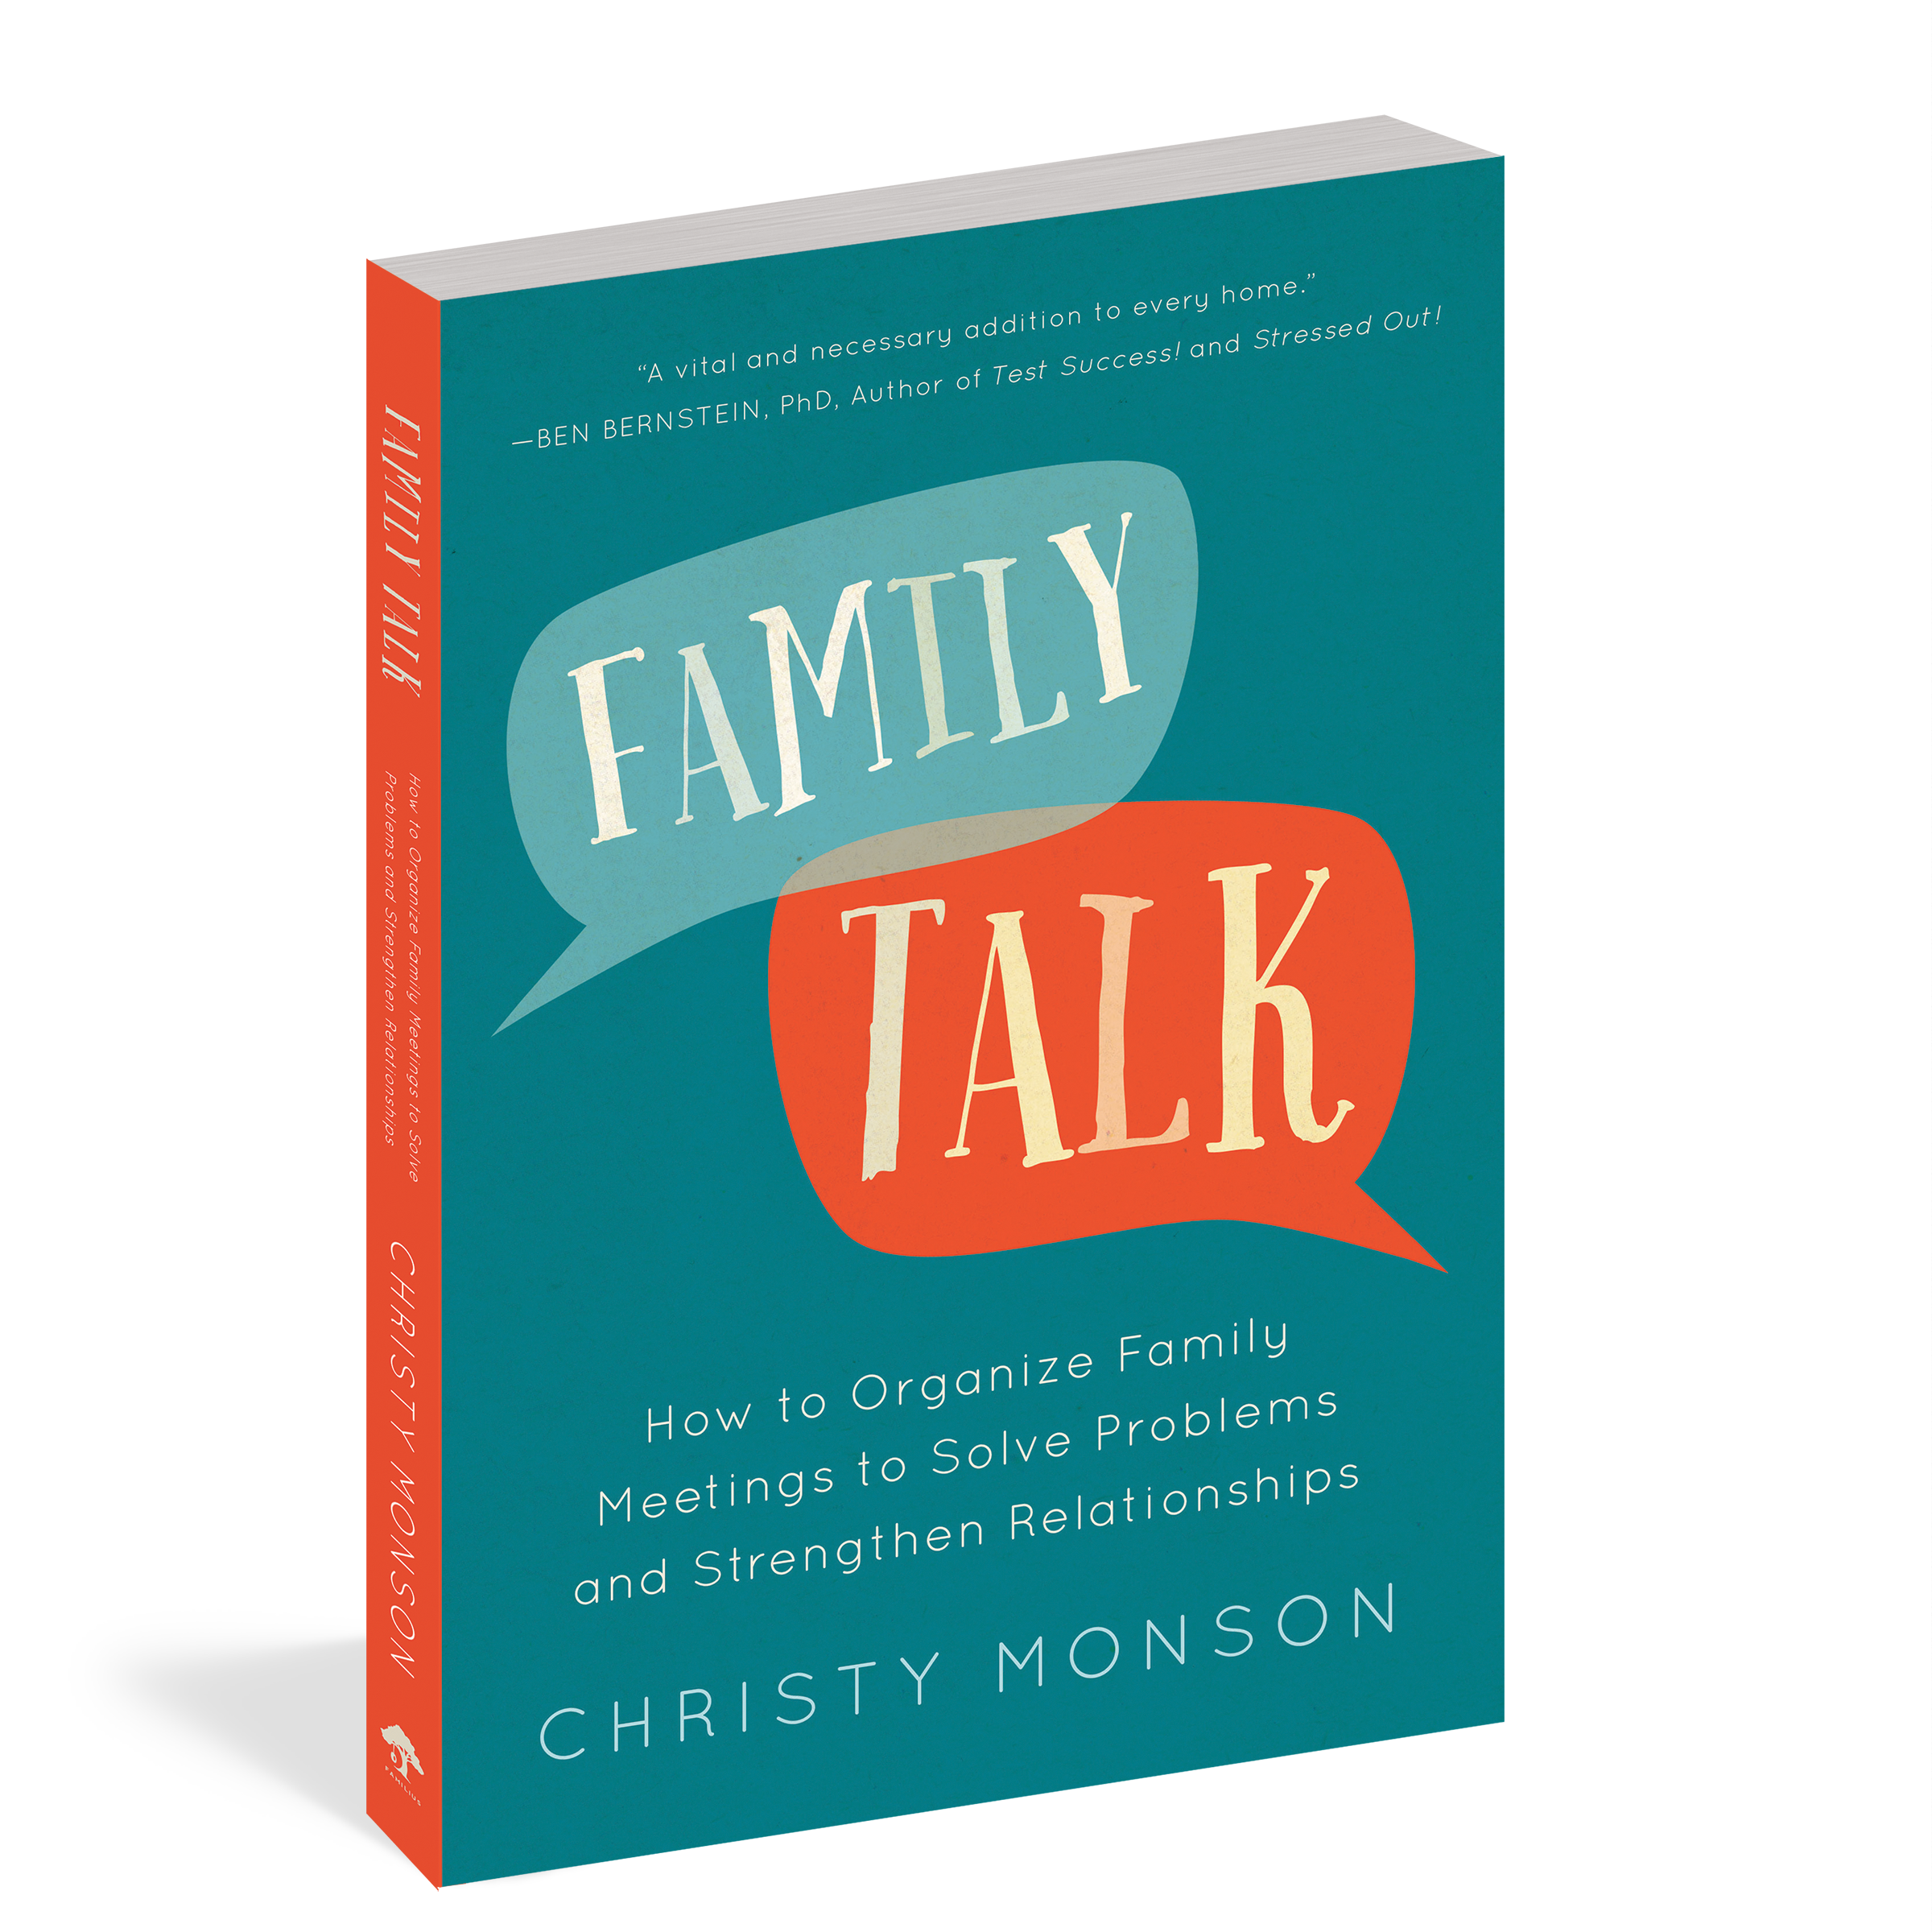 The cover of the book Family Talk.